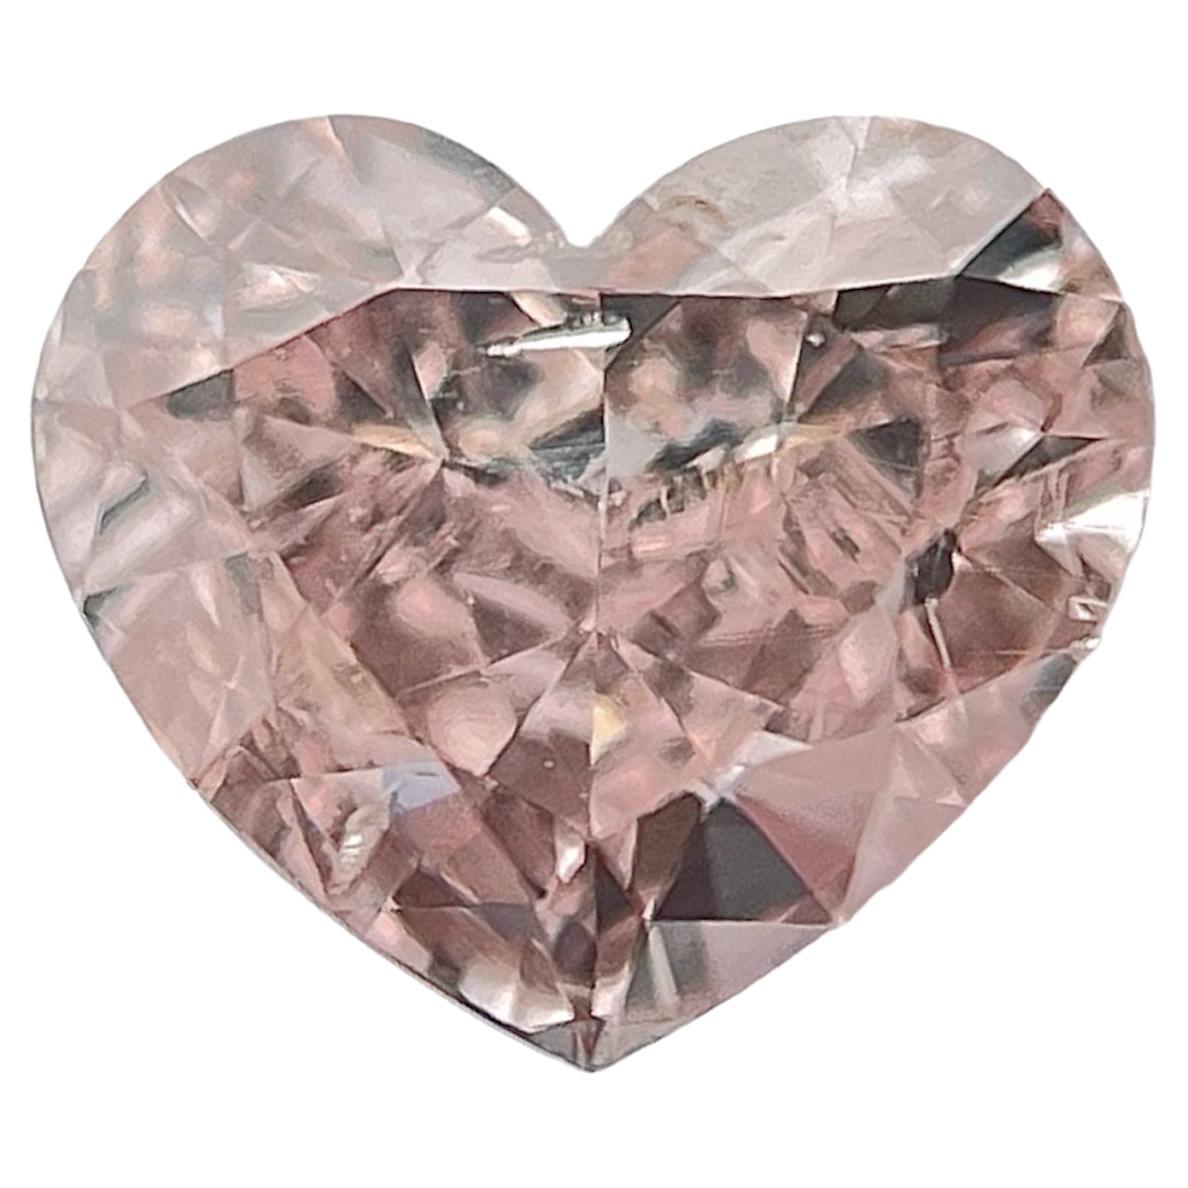 GIA Certified 0.43 Carat Heart Modified Fancy Pink Brown Si2 Natural Diamond For Sale